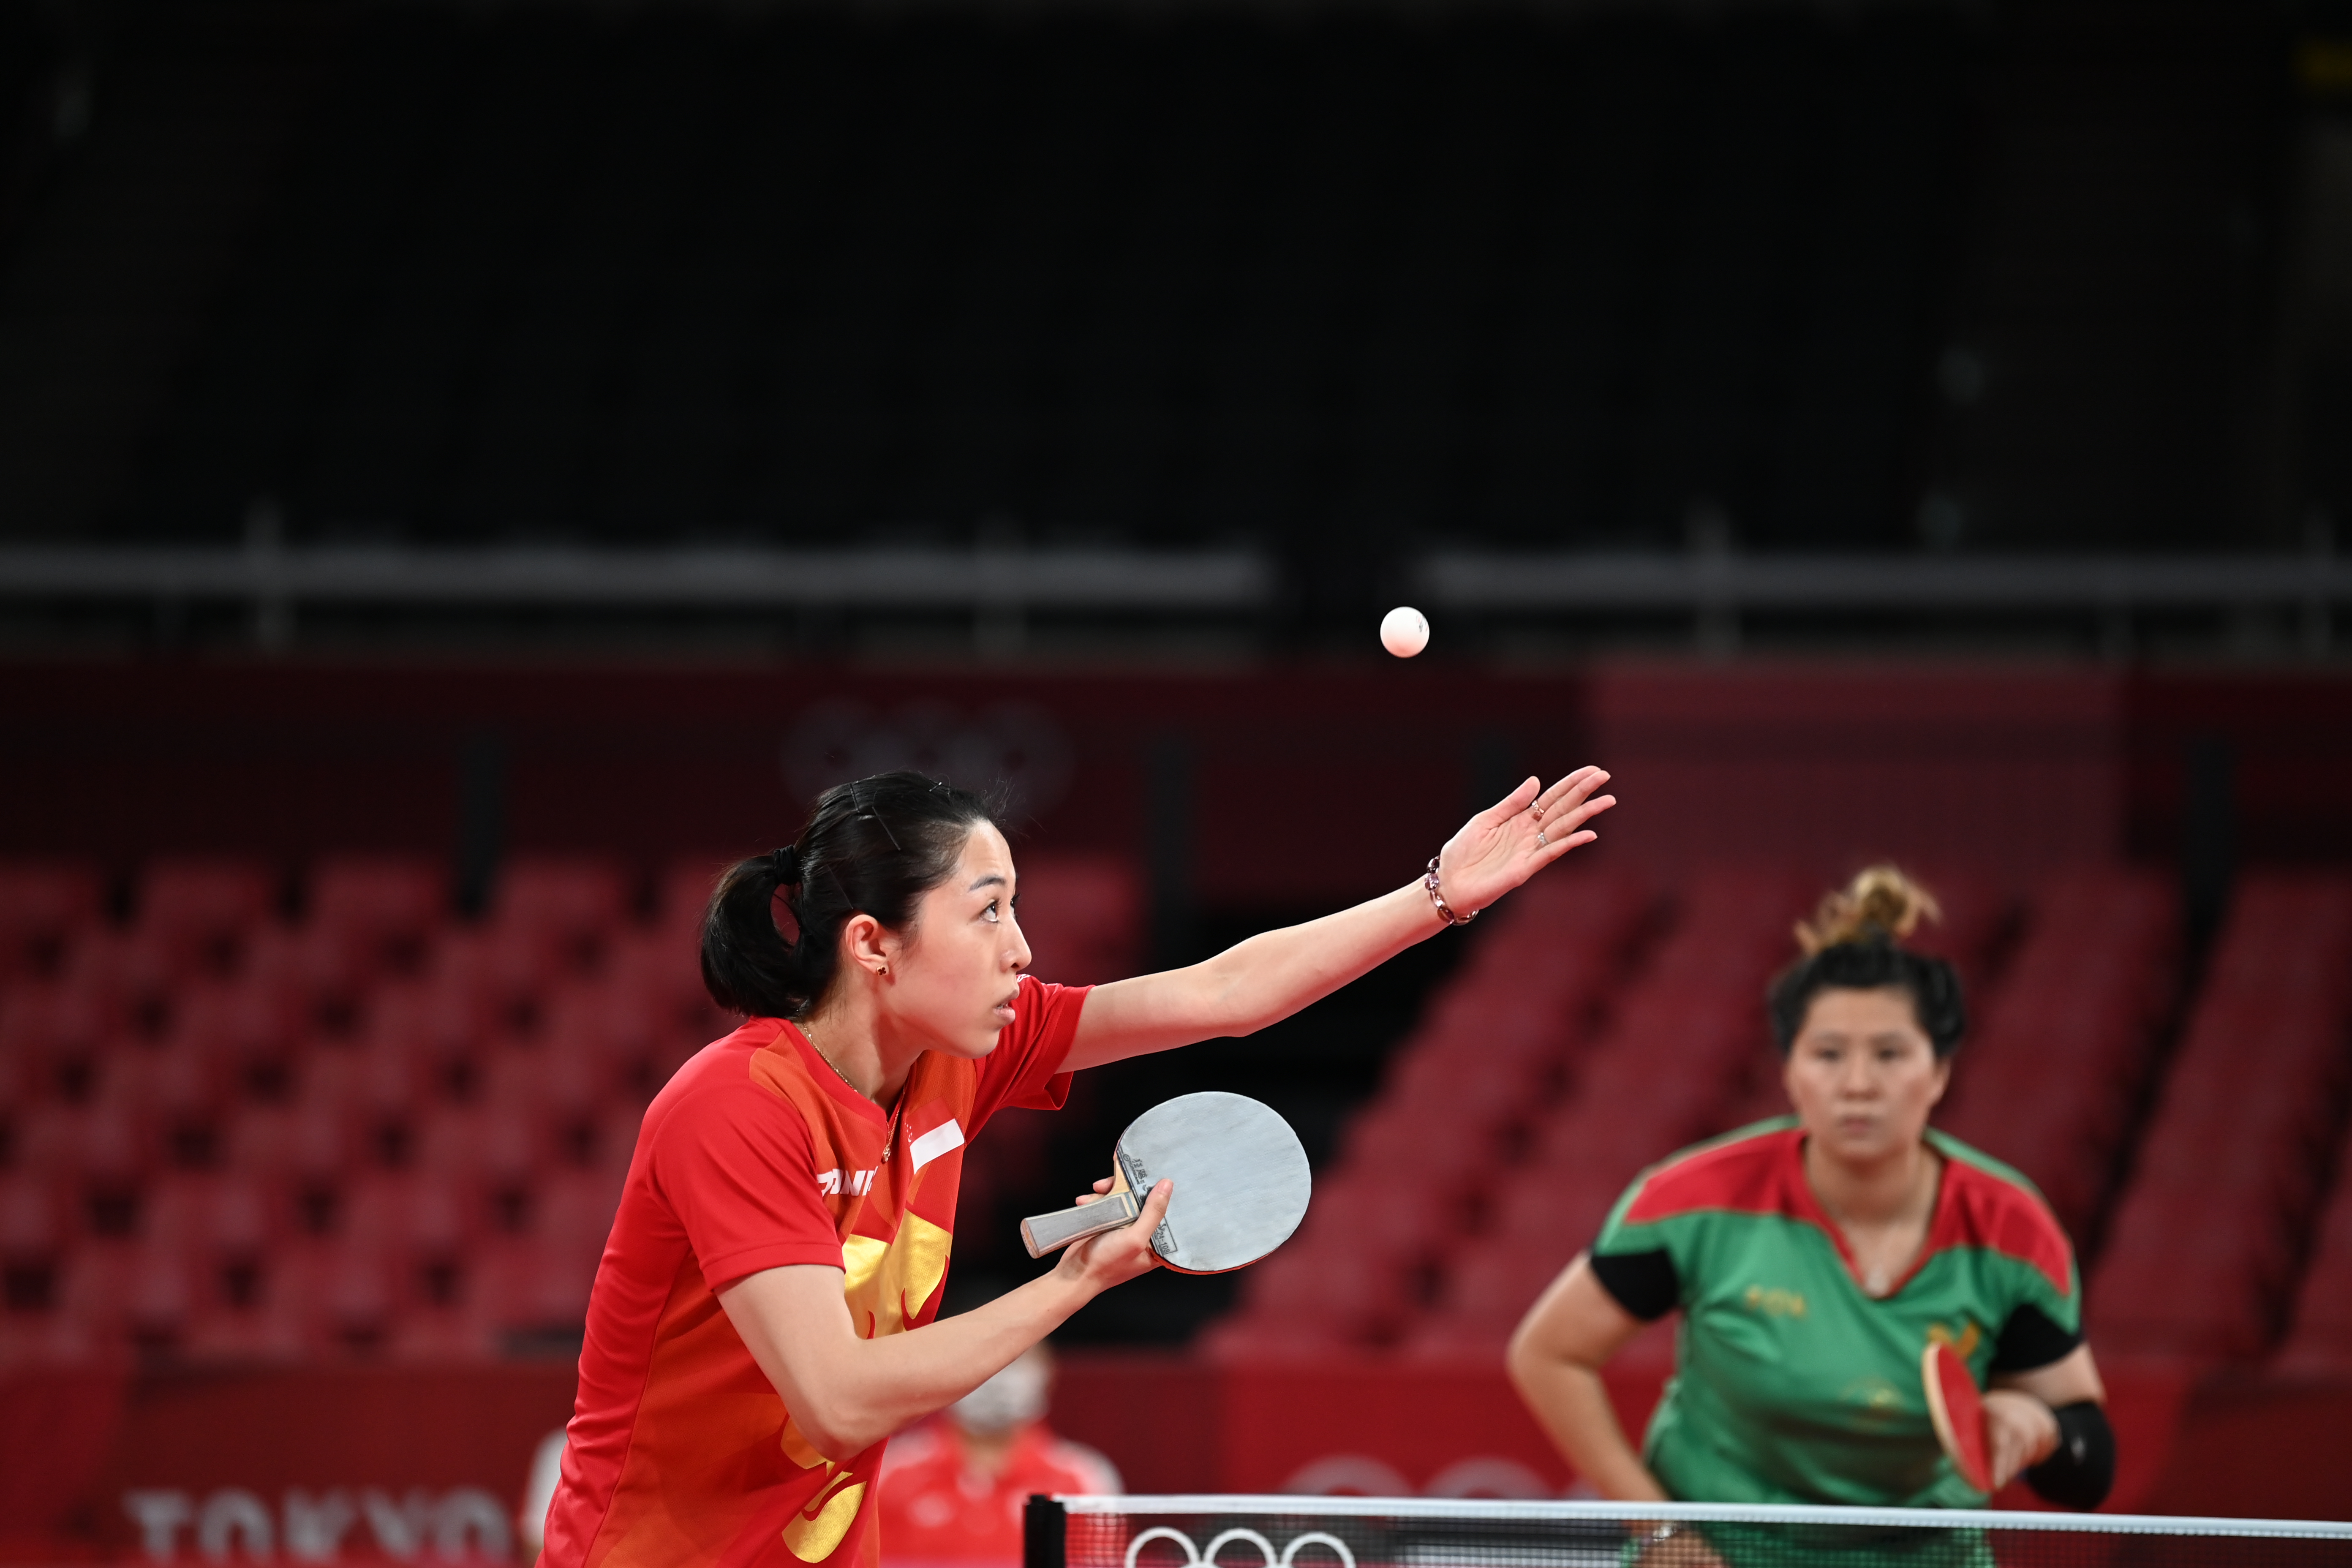 Tokyo 2020 : TeamSG Paddler Yu Mengyu dispatches Portuguese opponent in 30 minutes to reach 3rd round!